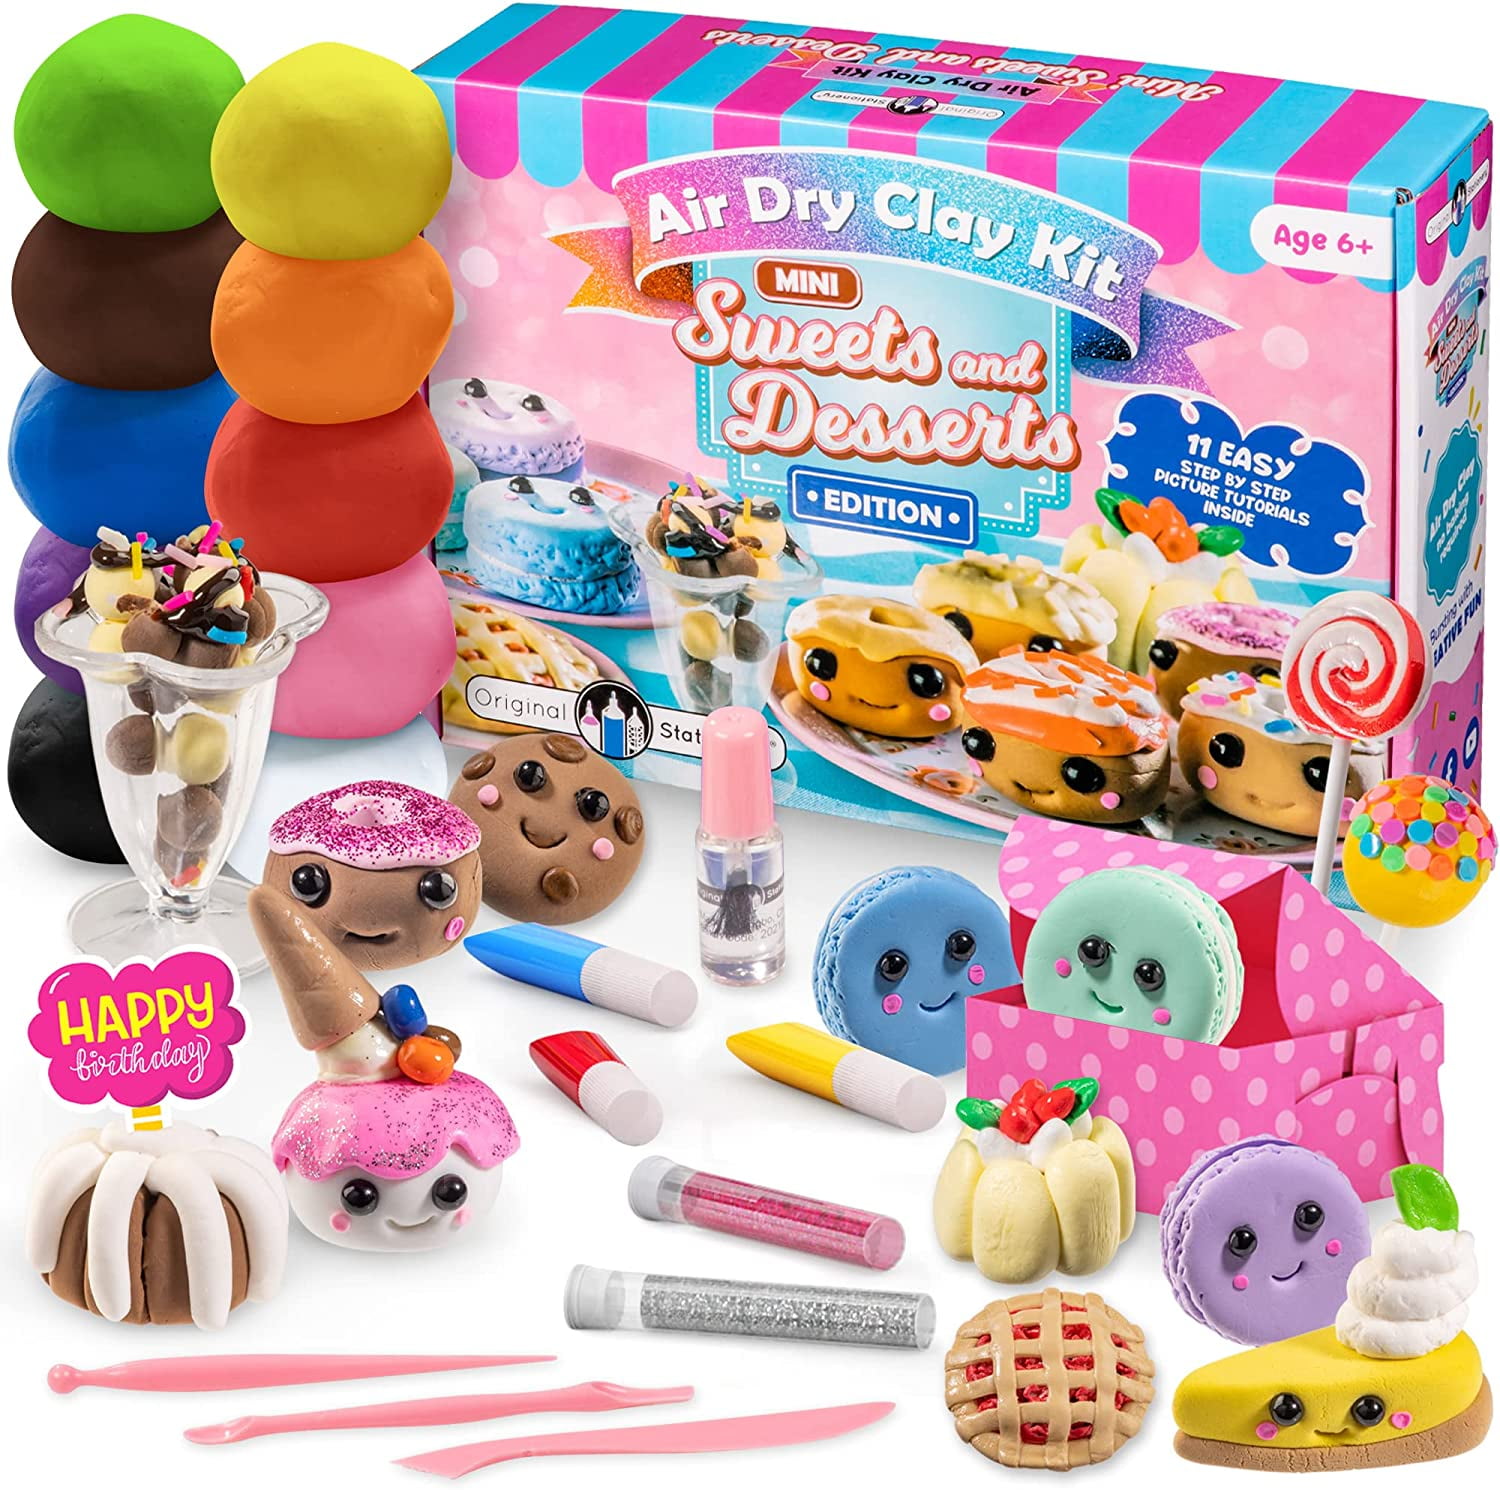 Original Stationery Mini Sweets & Desserts Air Dry Clay Kit with Air Dry  Clay for Kids in All The Colors You Need and More in This DIY Craft Kit to